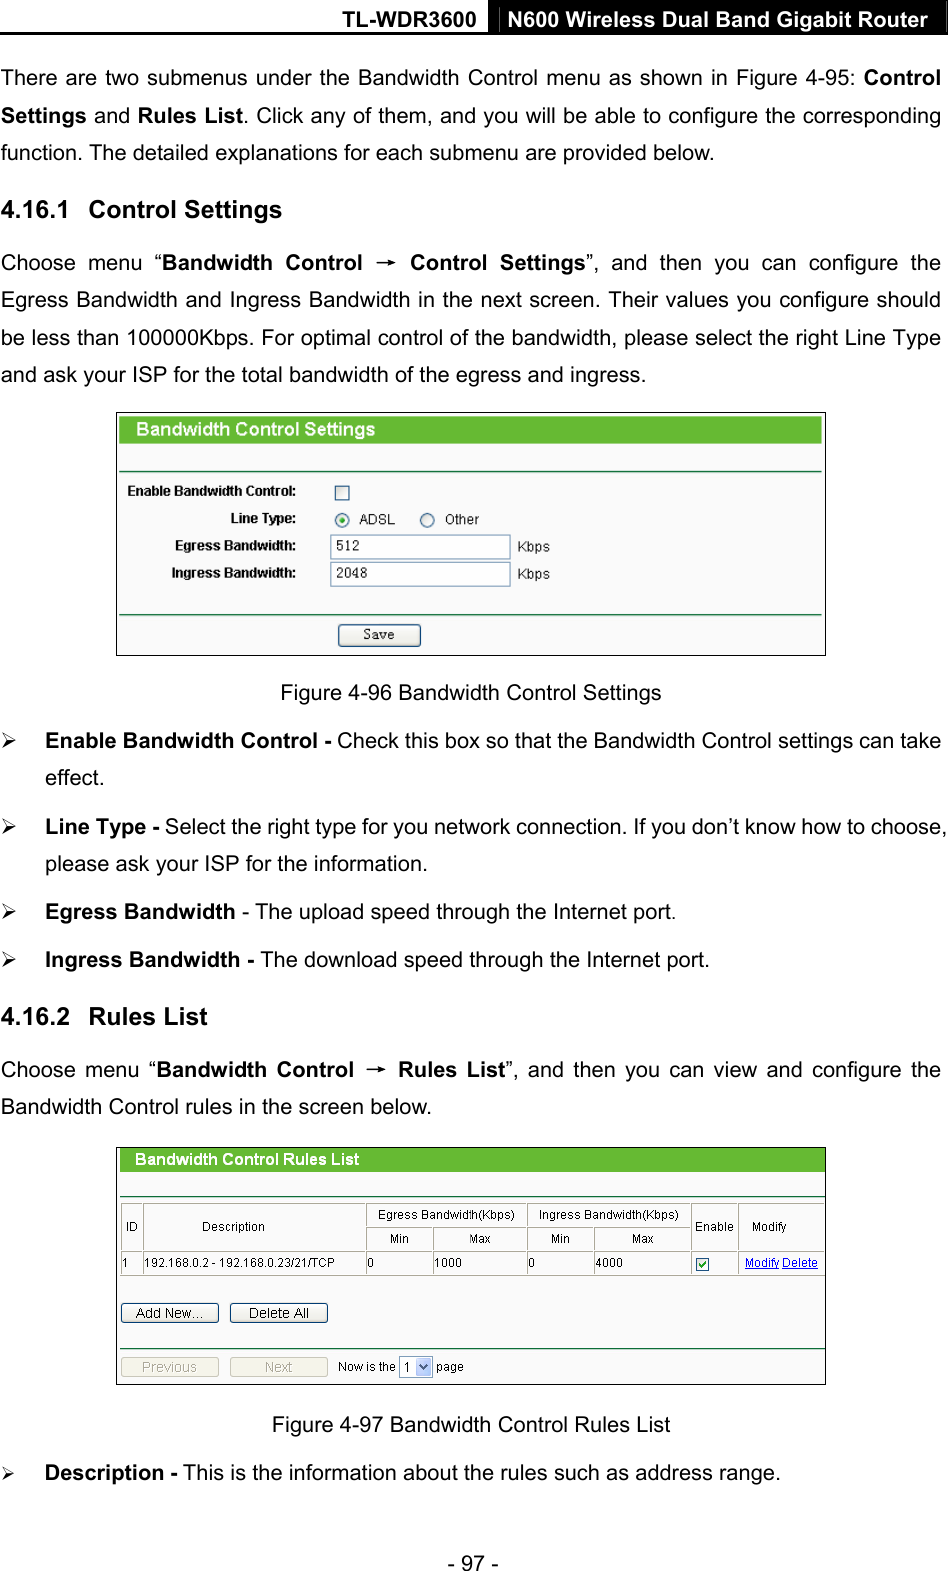 TL-WDR3600 N600 Wireless Dual Band Gigabit Router  - 97 - There are two submenus under the Bandwidth Control menu as shown in Figure 4-95: Control Settings and Rules List. Click any of them, and you will be able to configure the corresponding function. The detailed explanations for each submenu are provided below. 4.16.1  Control Settings Choose menu “Bandwidth Control → Control Settings”, and then you can configure the Egress Bandwidth and Ingress Bandwidth in the next screen. Their values you configure should be less than 100000Kbps. For optimal control of the bandwidth, please select the right Line Type and ask your ISP for the total bandwidth of the egress and ingress.  Figure 4-96 Bandwidth Control Settings ¾ Enable Bandwidth Control - Check this box so that the Bandwidth Control settings can take effect. ¾ Line Type - Select the right type for you network connection. If you don’t know how to choose, please ask your ISP for the information. ¾ Egress Bandwidth - The upload speed through the Internet port. ¾ Ingress Bandwidth - The download speed through the Internet port. 4.16.2  Rules List Choose menu “Bandwidth Control → Rules List”, and then you can view and configure the Bandwidth Control rules in the screen below.  Figure 4-97 Bandwidth Control Rules List ¾ Description - This is the information about the rules such as address range. 